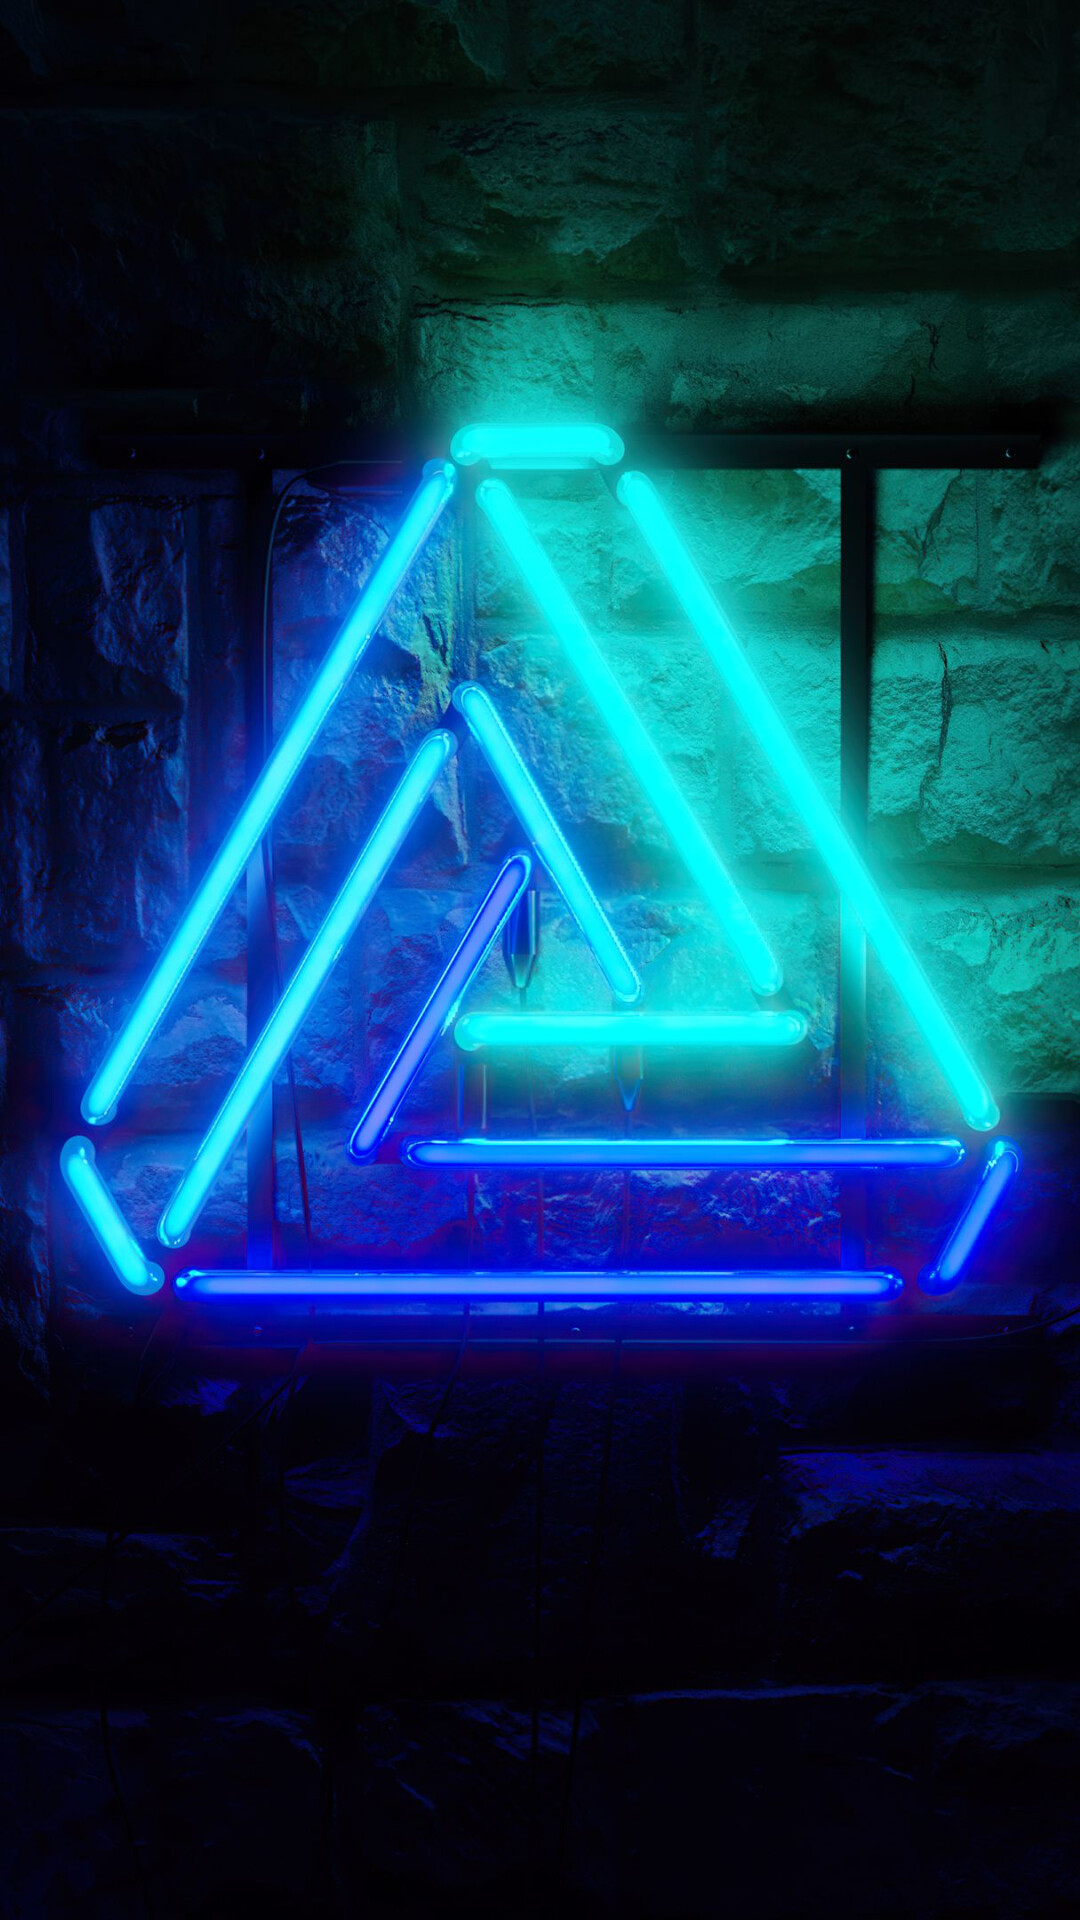 Triangle: Neon Penrose triangle on the wall, Parallel line segments. 1080x1920 Full HD Wallpaper.